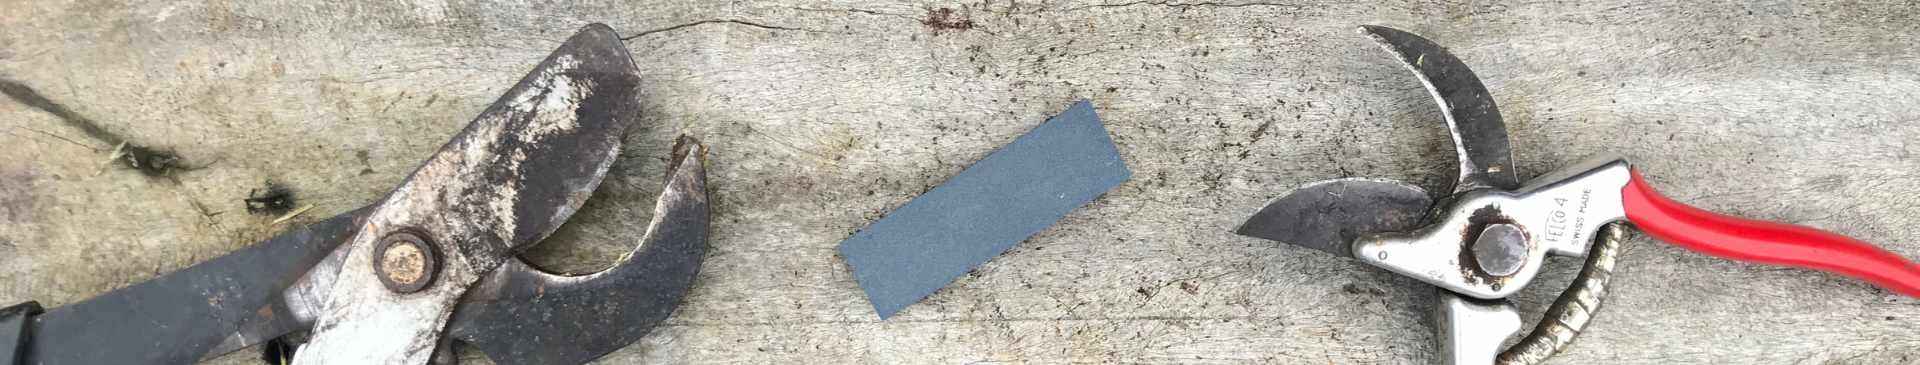 Using a Sharpening Stone to Keep a Cutting Edge